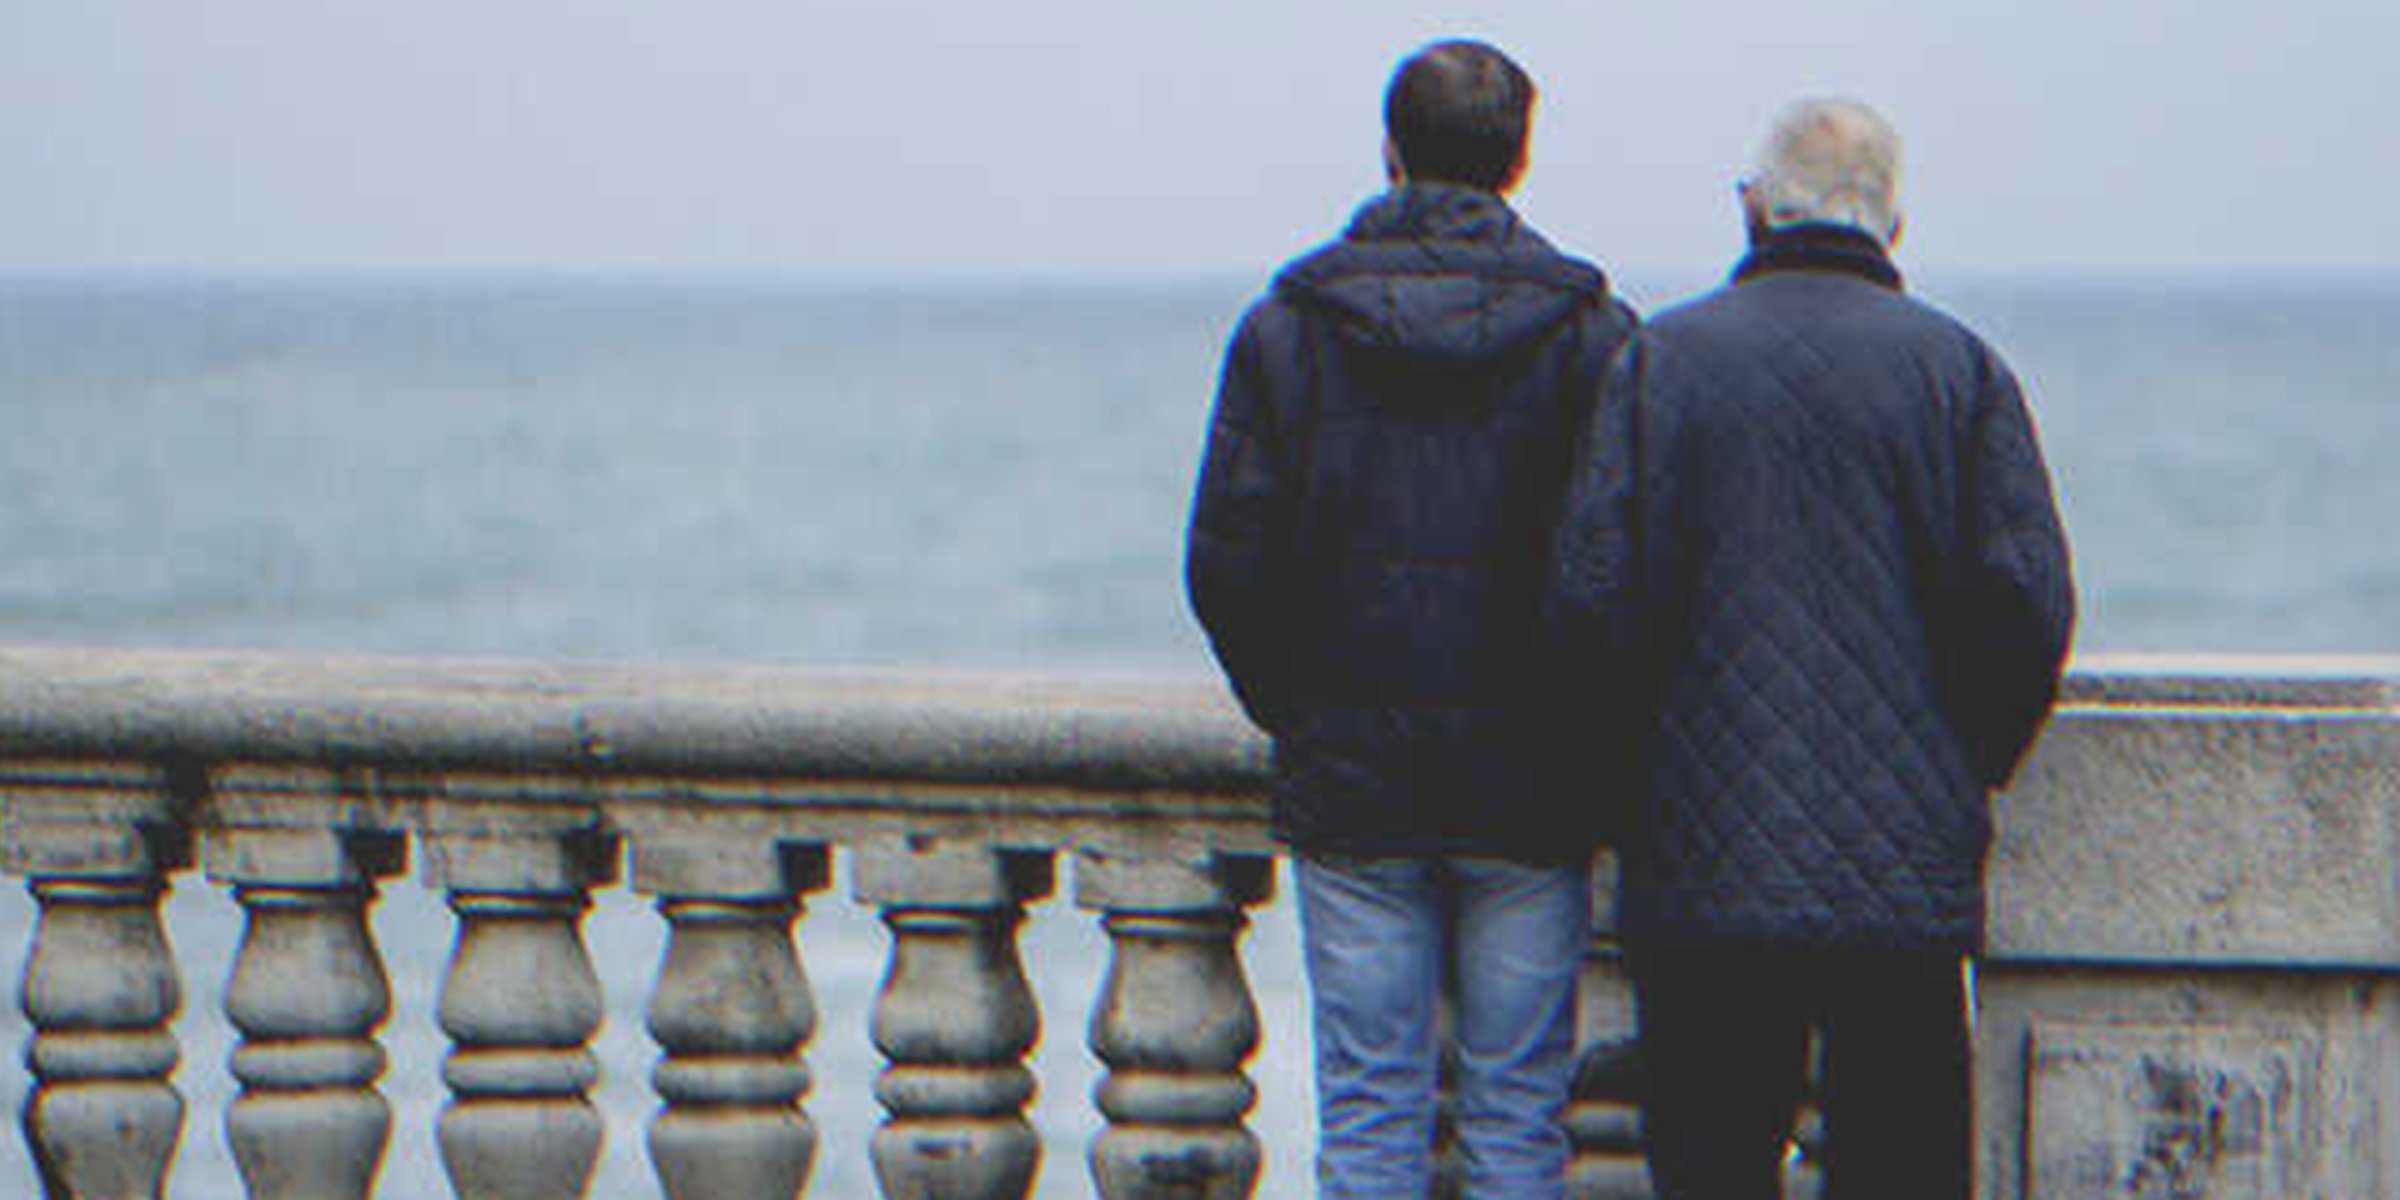 A man and an older man looking at the ocean | Source: Shutterstock